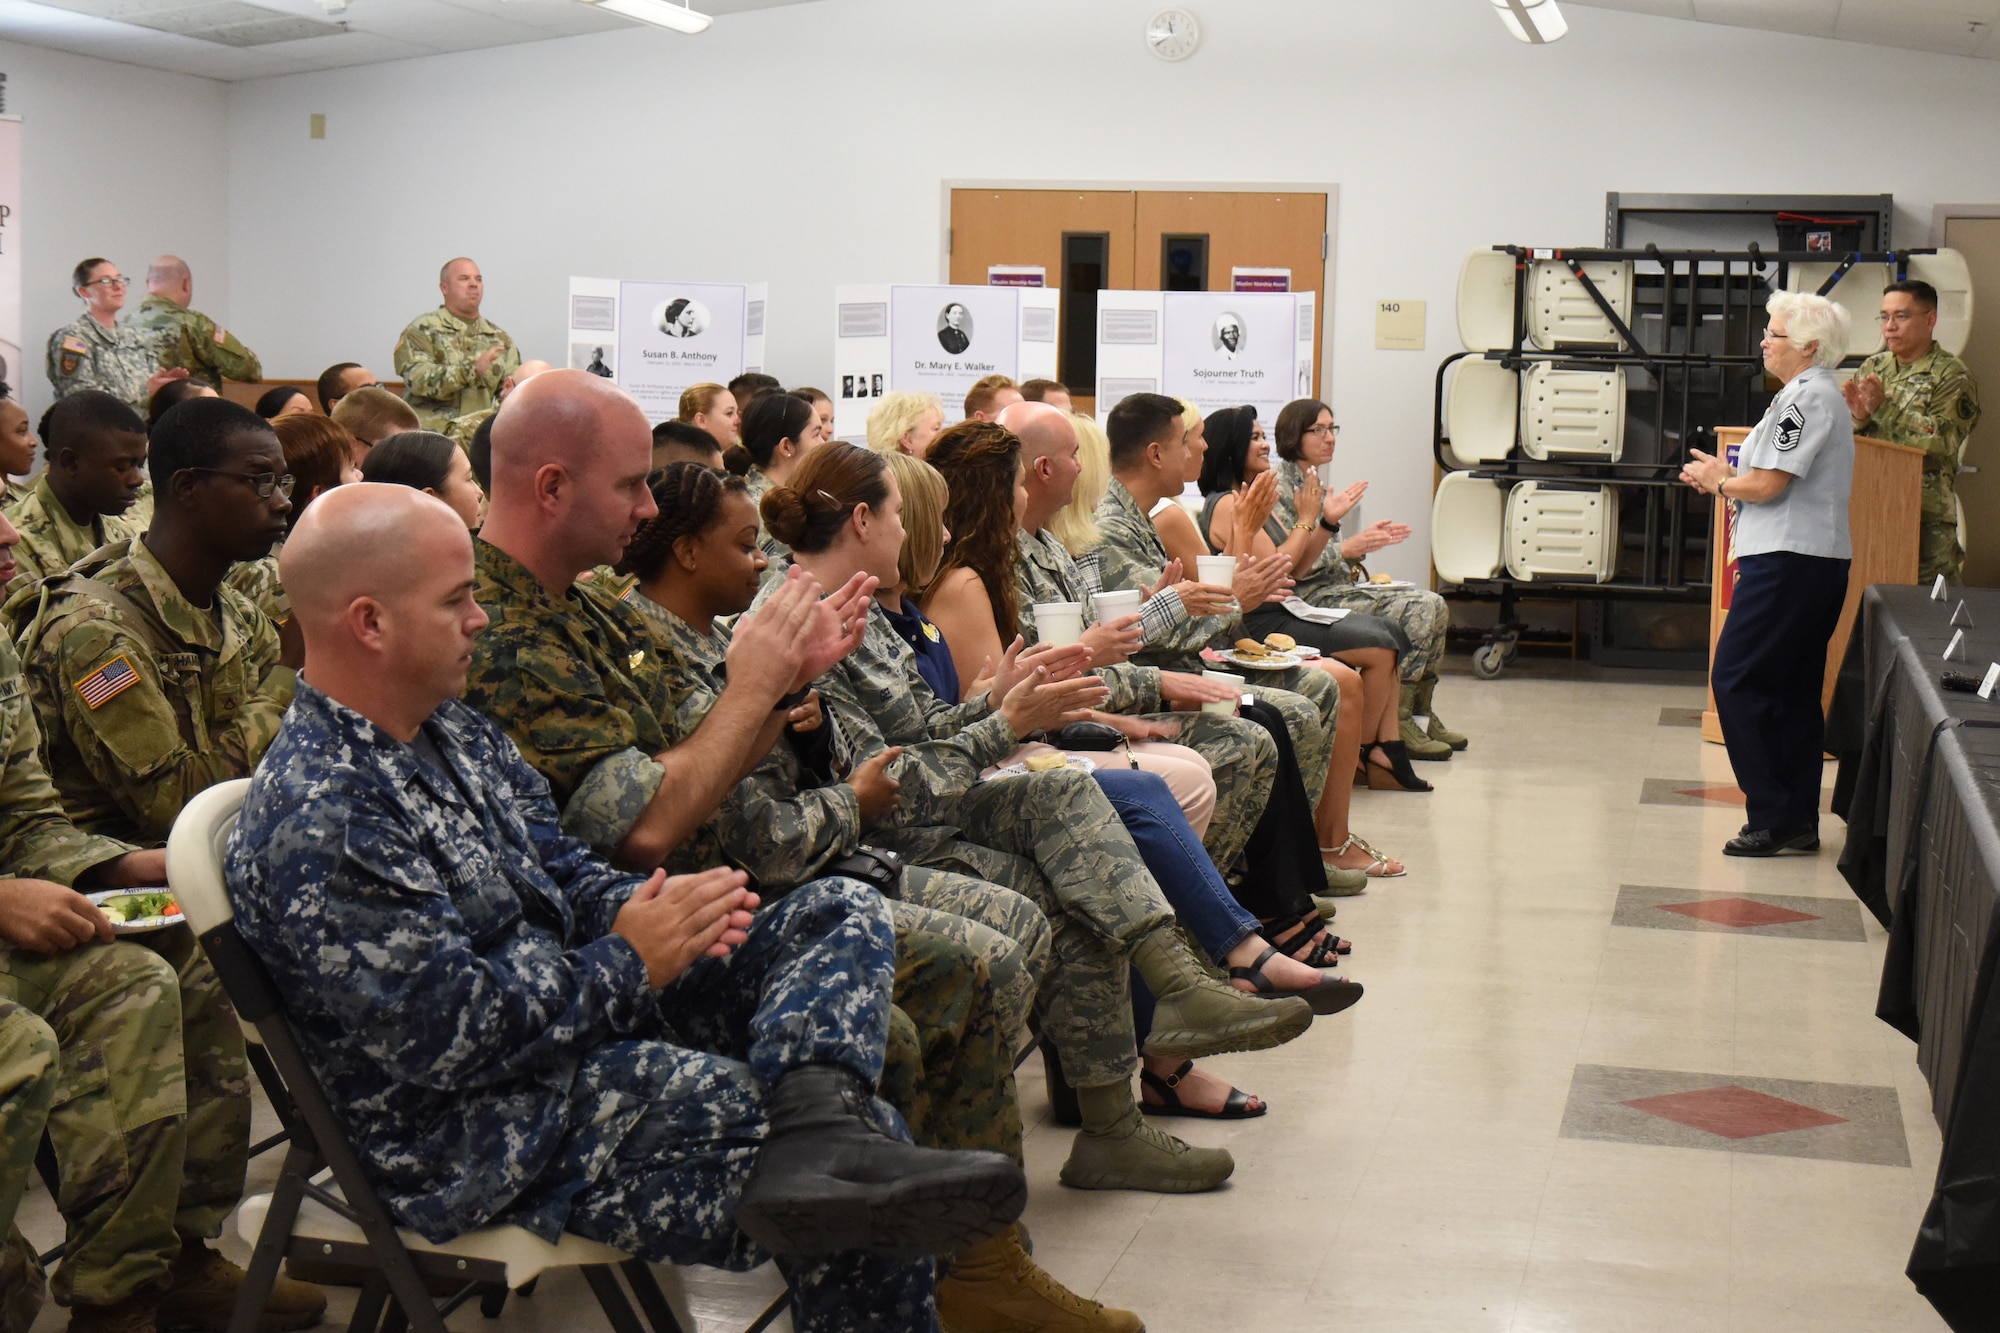 Goodfellow service members welcome retired U.S. Air Force Chief Master Sgt. Kathleen Prince back to Goodfellow for a speech about her time in the military for Women’s Equality Day at the Taylor Chapel on Goodfellow Air Force Base, Texas, Aug. 24, 2018. Prince was stationed at Goodfellow several times during her career with the Air Force and now teaches junior ROTC cadets at Central High School in San Angelo. (U.S. Air Force photo by Airman 1st Class Seraiah Hines/Released)